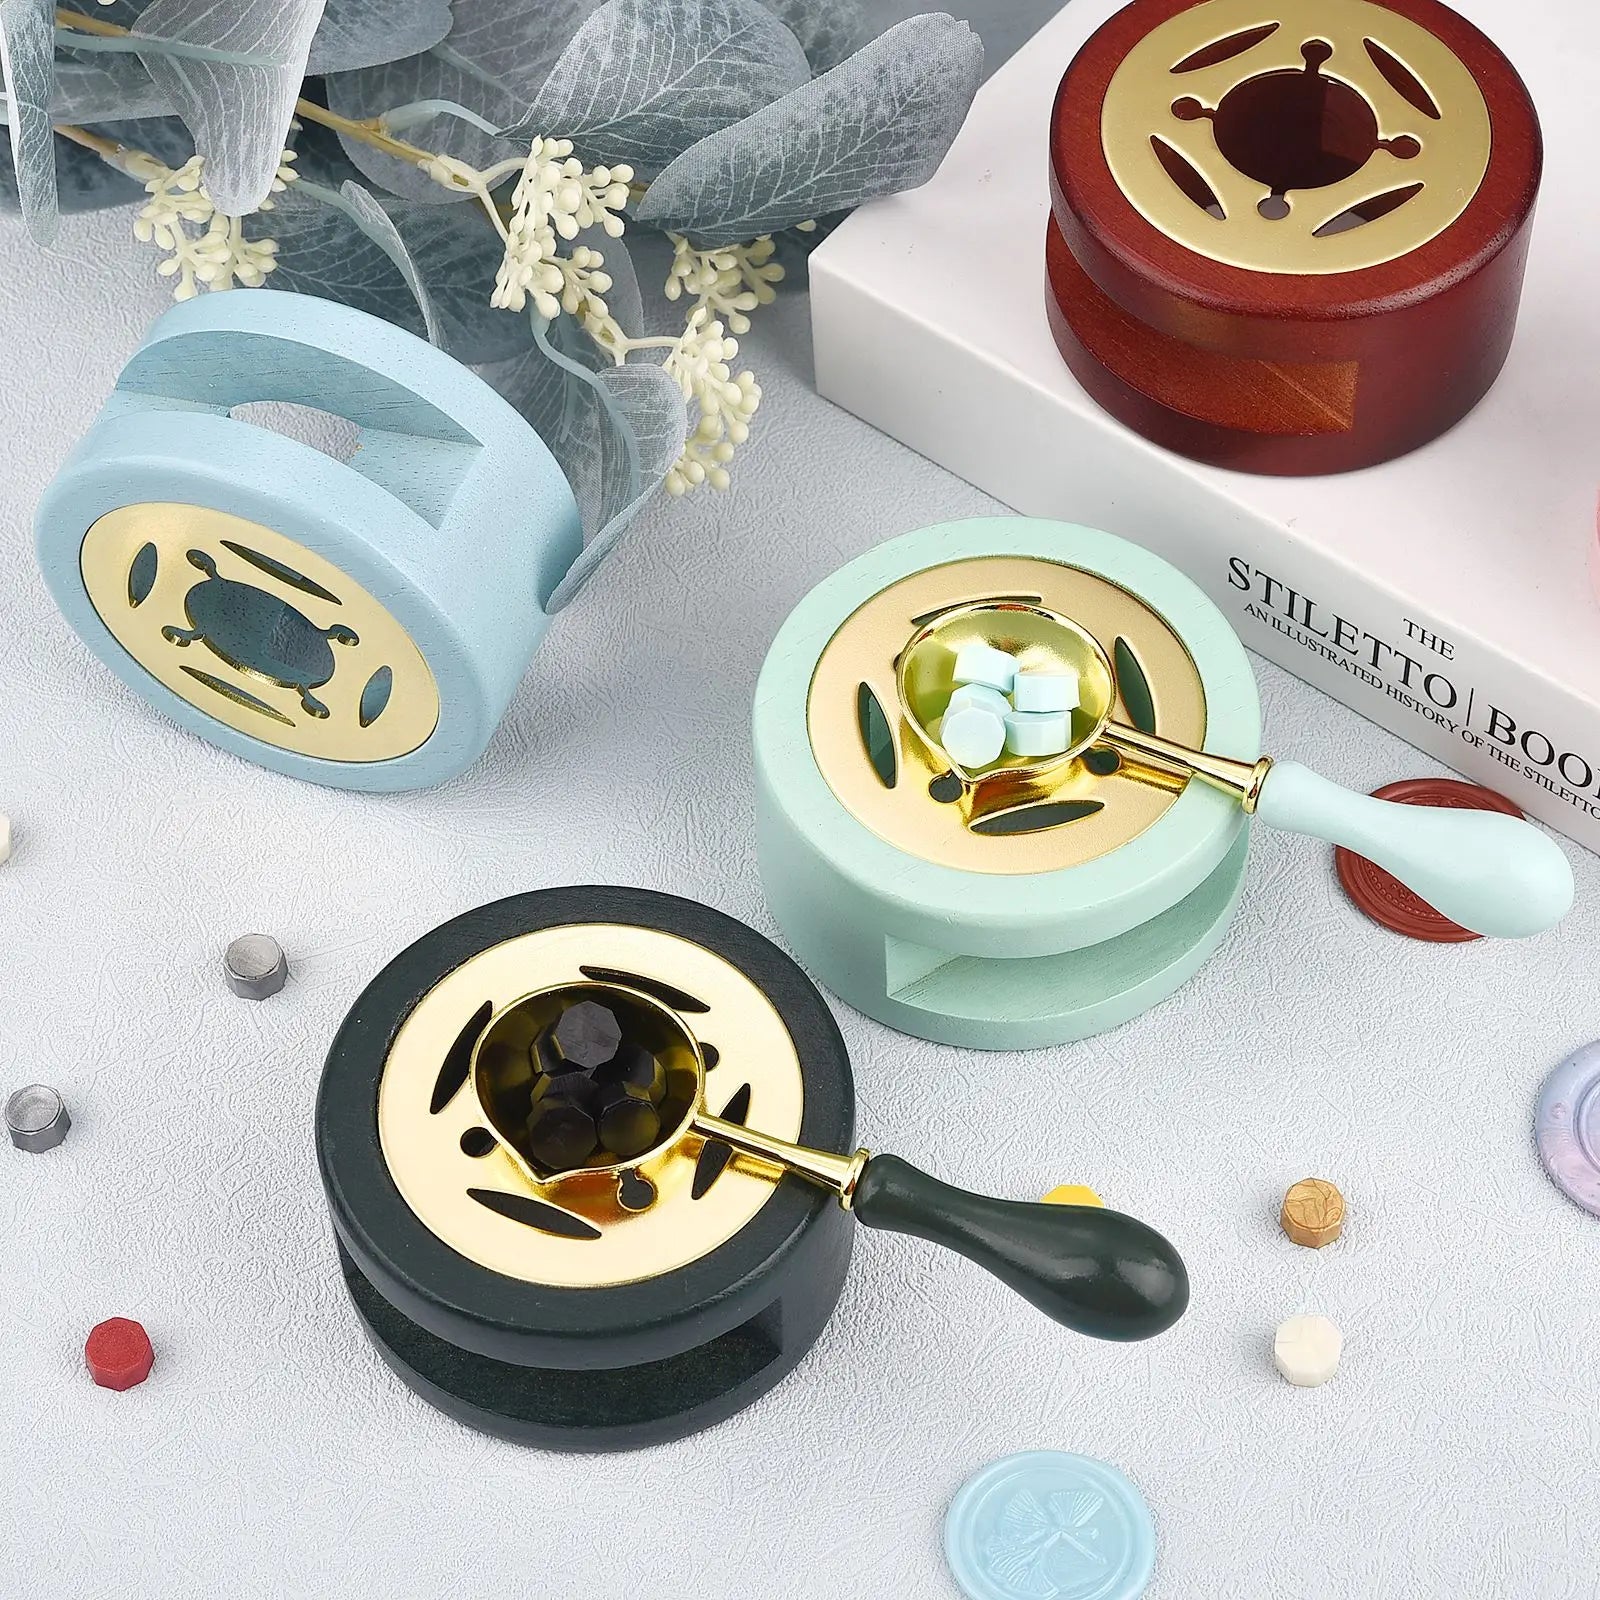 2PCS Wax Seal Stamp Set Retro Lacquer Stove With Wood Handle Spoon Kit Wax Seal Melting Furnace Heater Wax Bead Stick Heater Pot